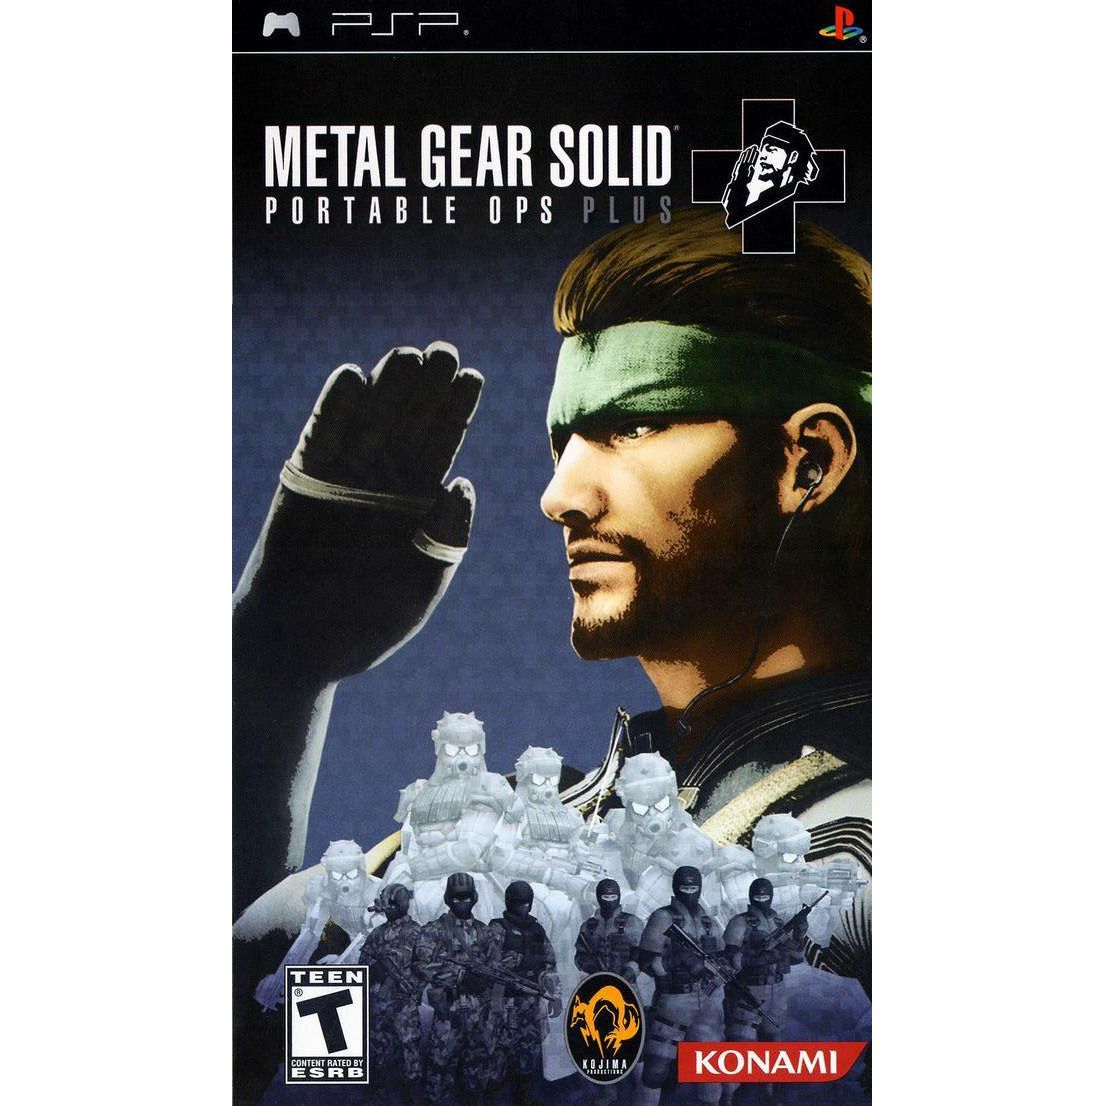 PSP - Metal Gear Solid - Portable Ops Plus (In Case)